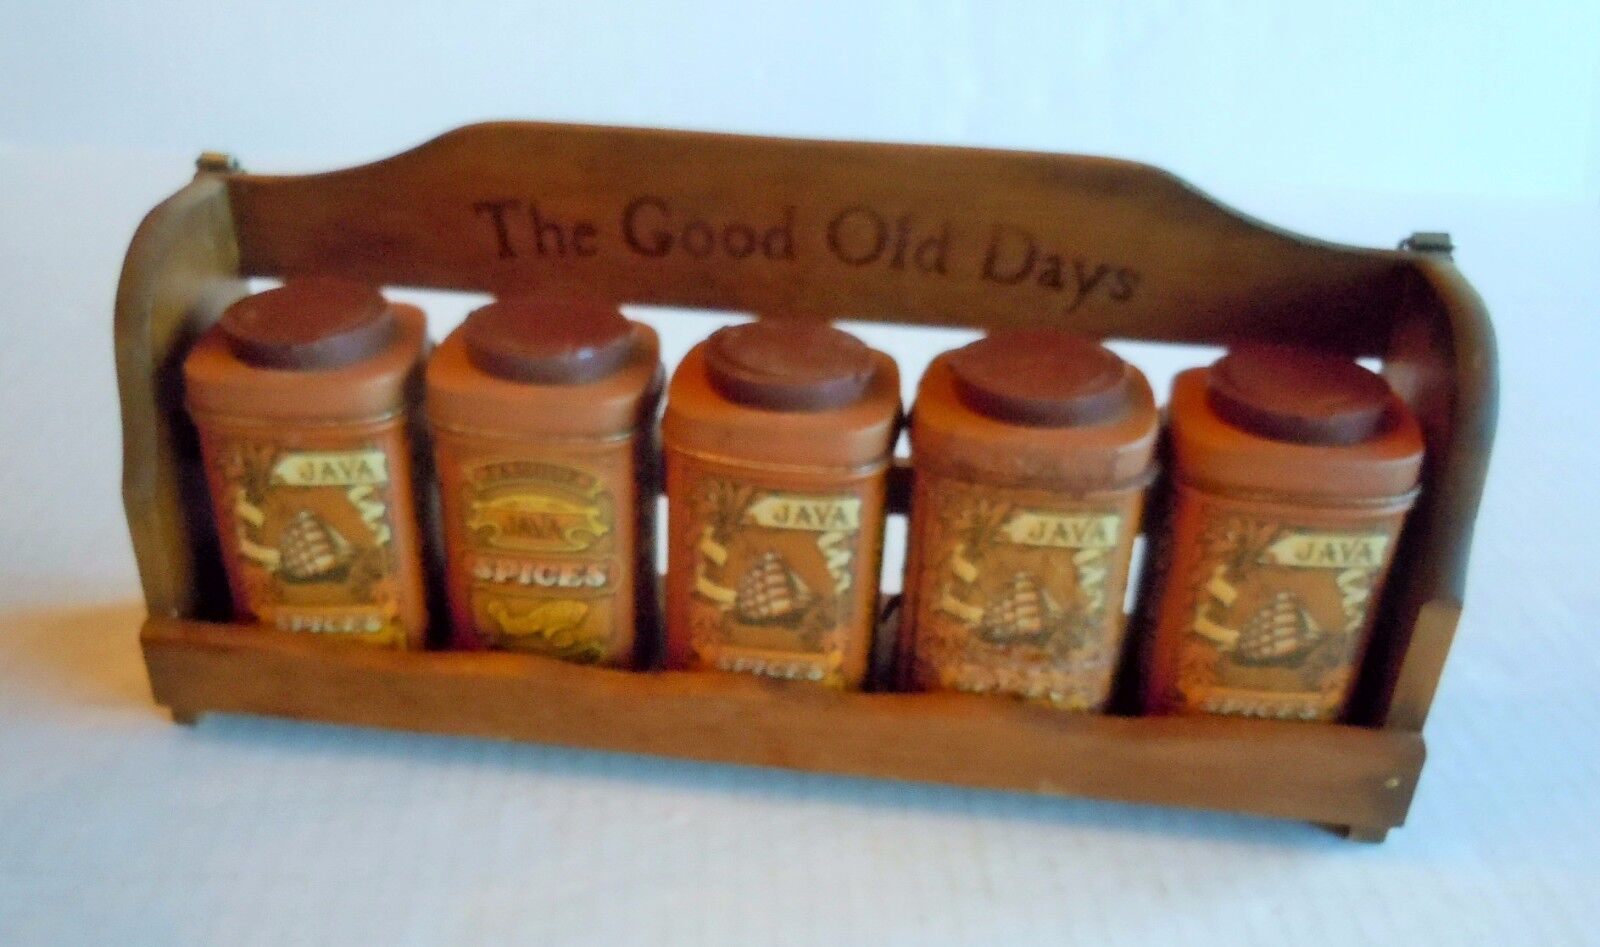 Wood Spice Rack Famous JAVA Spices Imported Since 1838 The Good Old Days 5 Tins